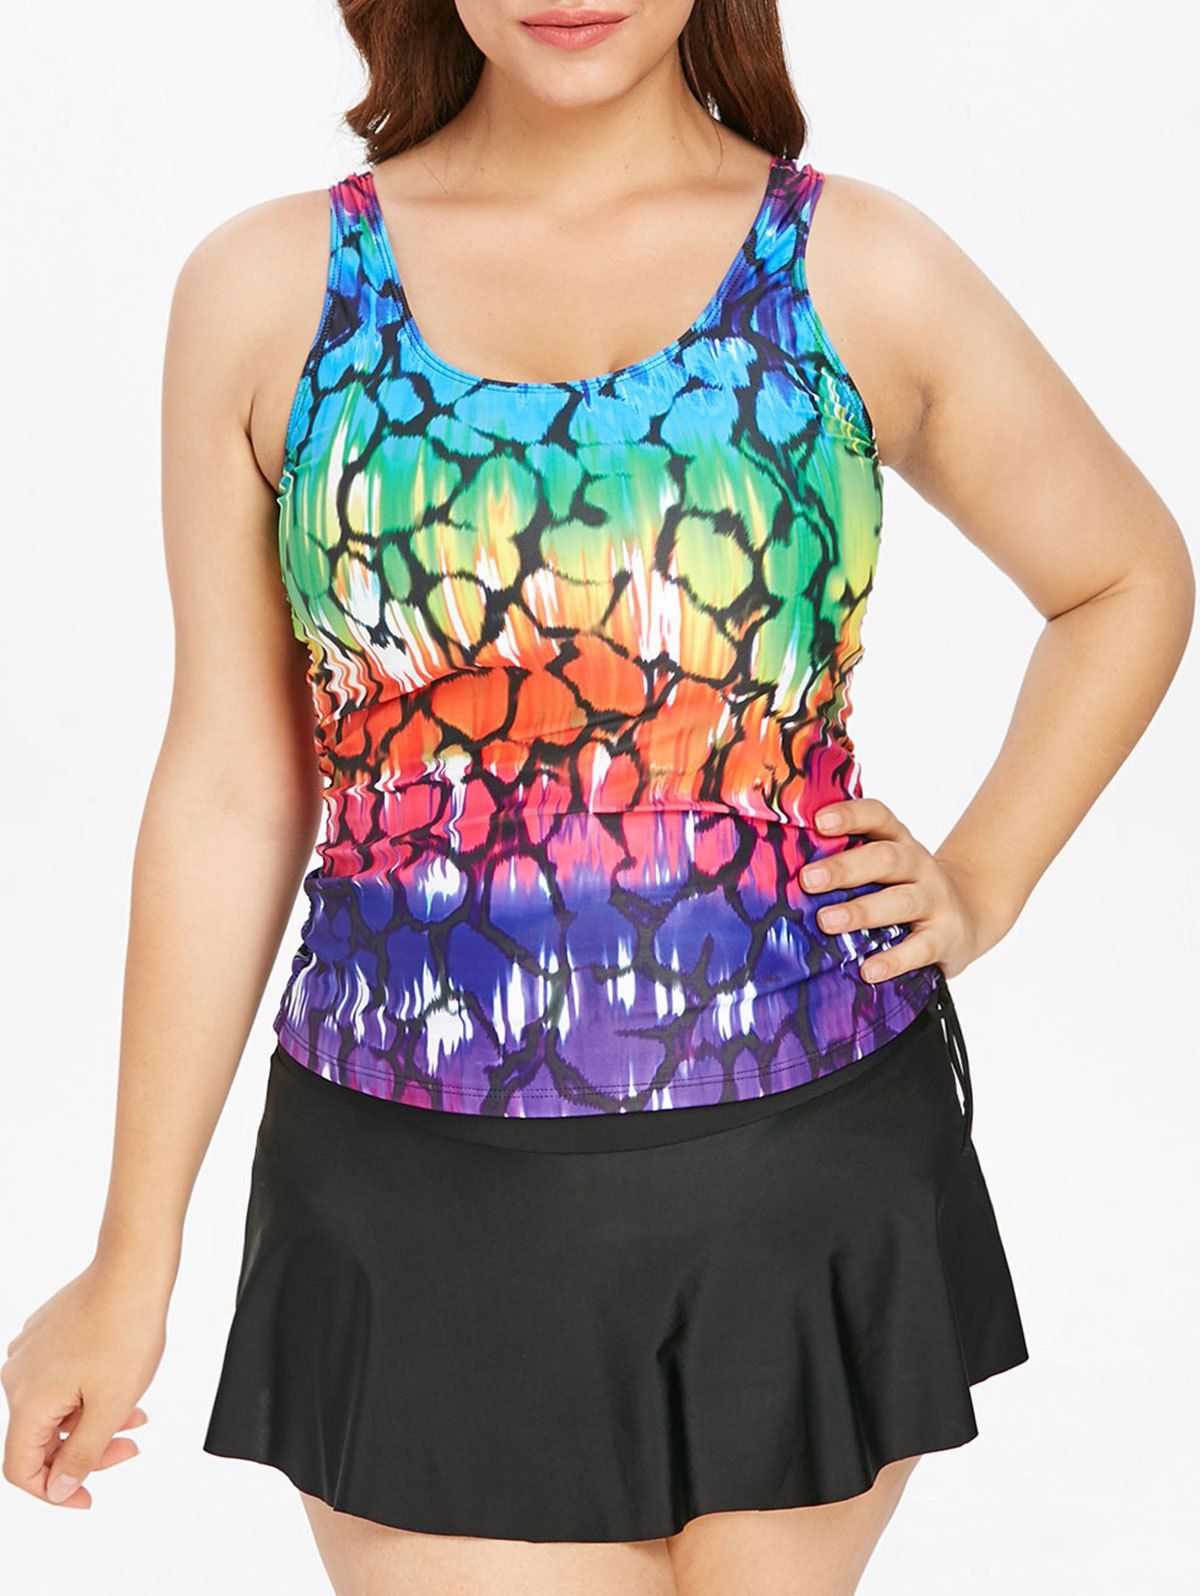 Plus Size Ombre Tankini Set with Cinched - multicolor L